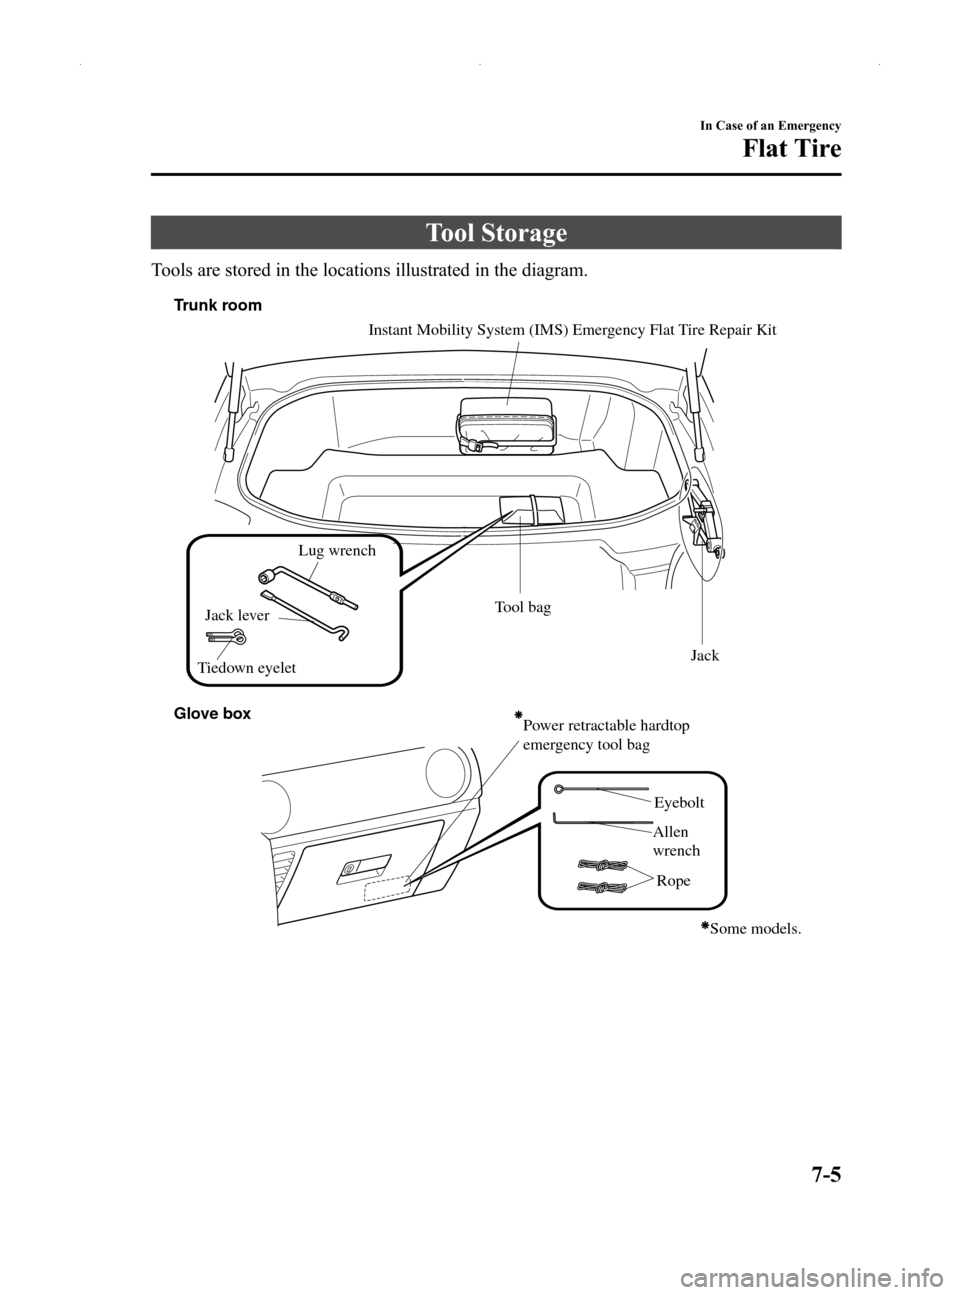 MAZDA MODEL MX-5 2014  Owners Manual (in English) Black plate (305,1)
Tool Storage
Tools are stored in the locations illustrated in the diagram.
Power retractable hardtop 
emergency tool bag
Tool bagGlove box Lug wrench
Jack
Jack lever
Instant Mobili